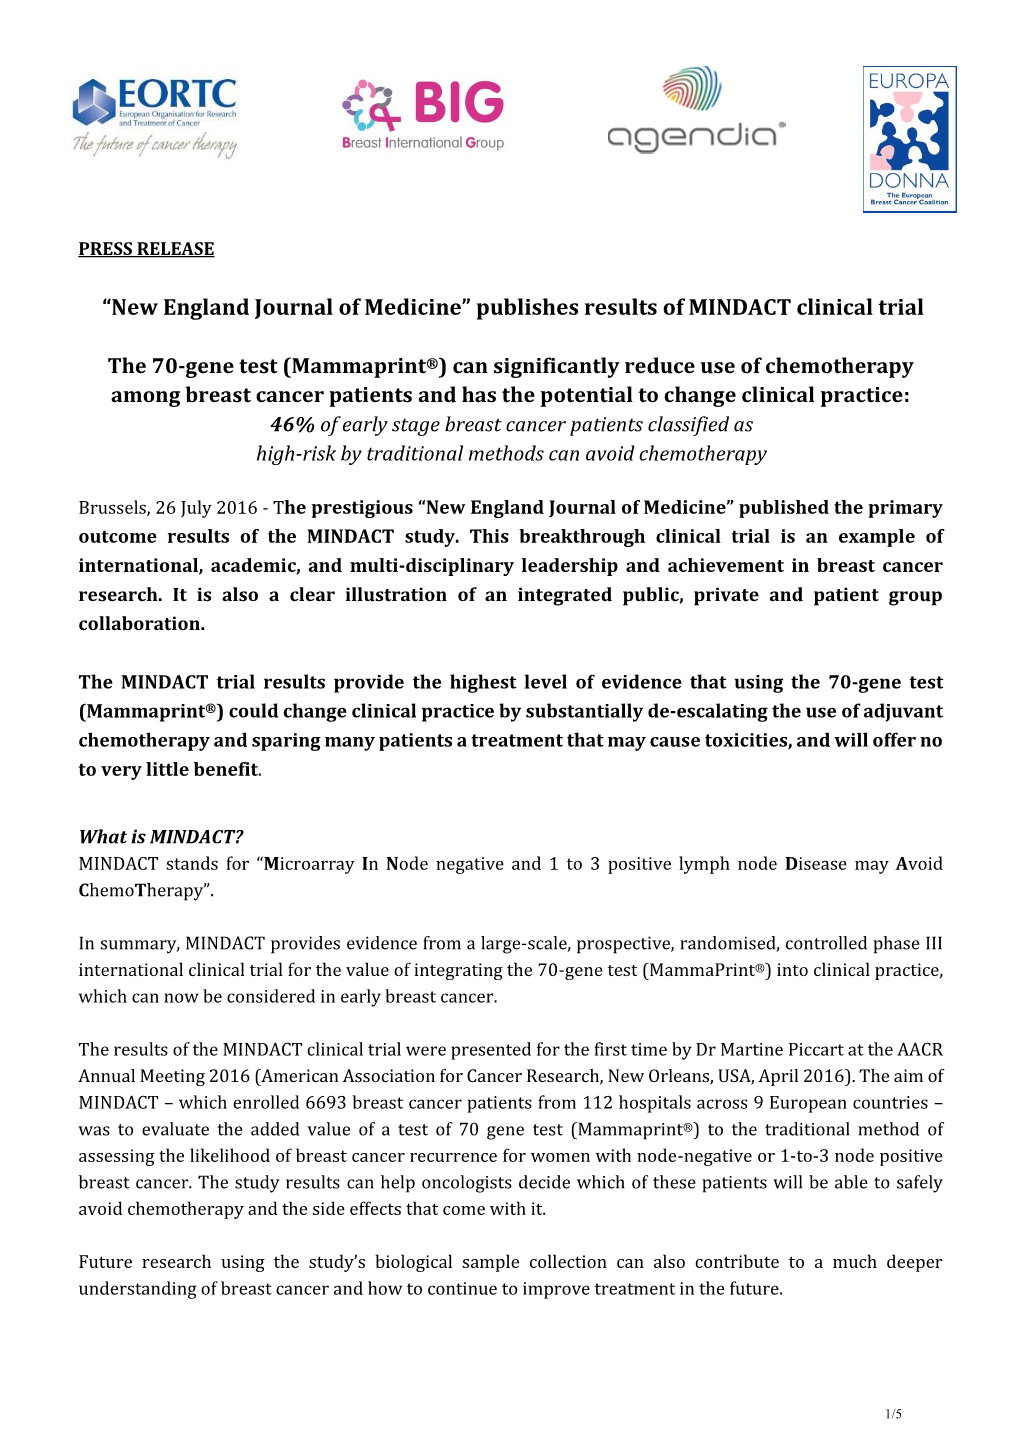 Publishes Results of MINDACT Clinical Trial